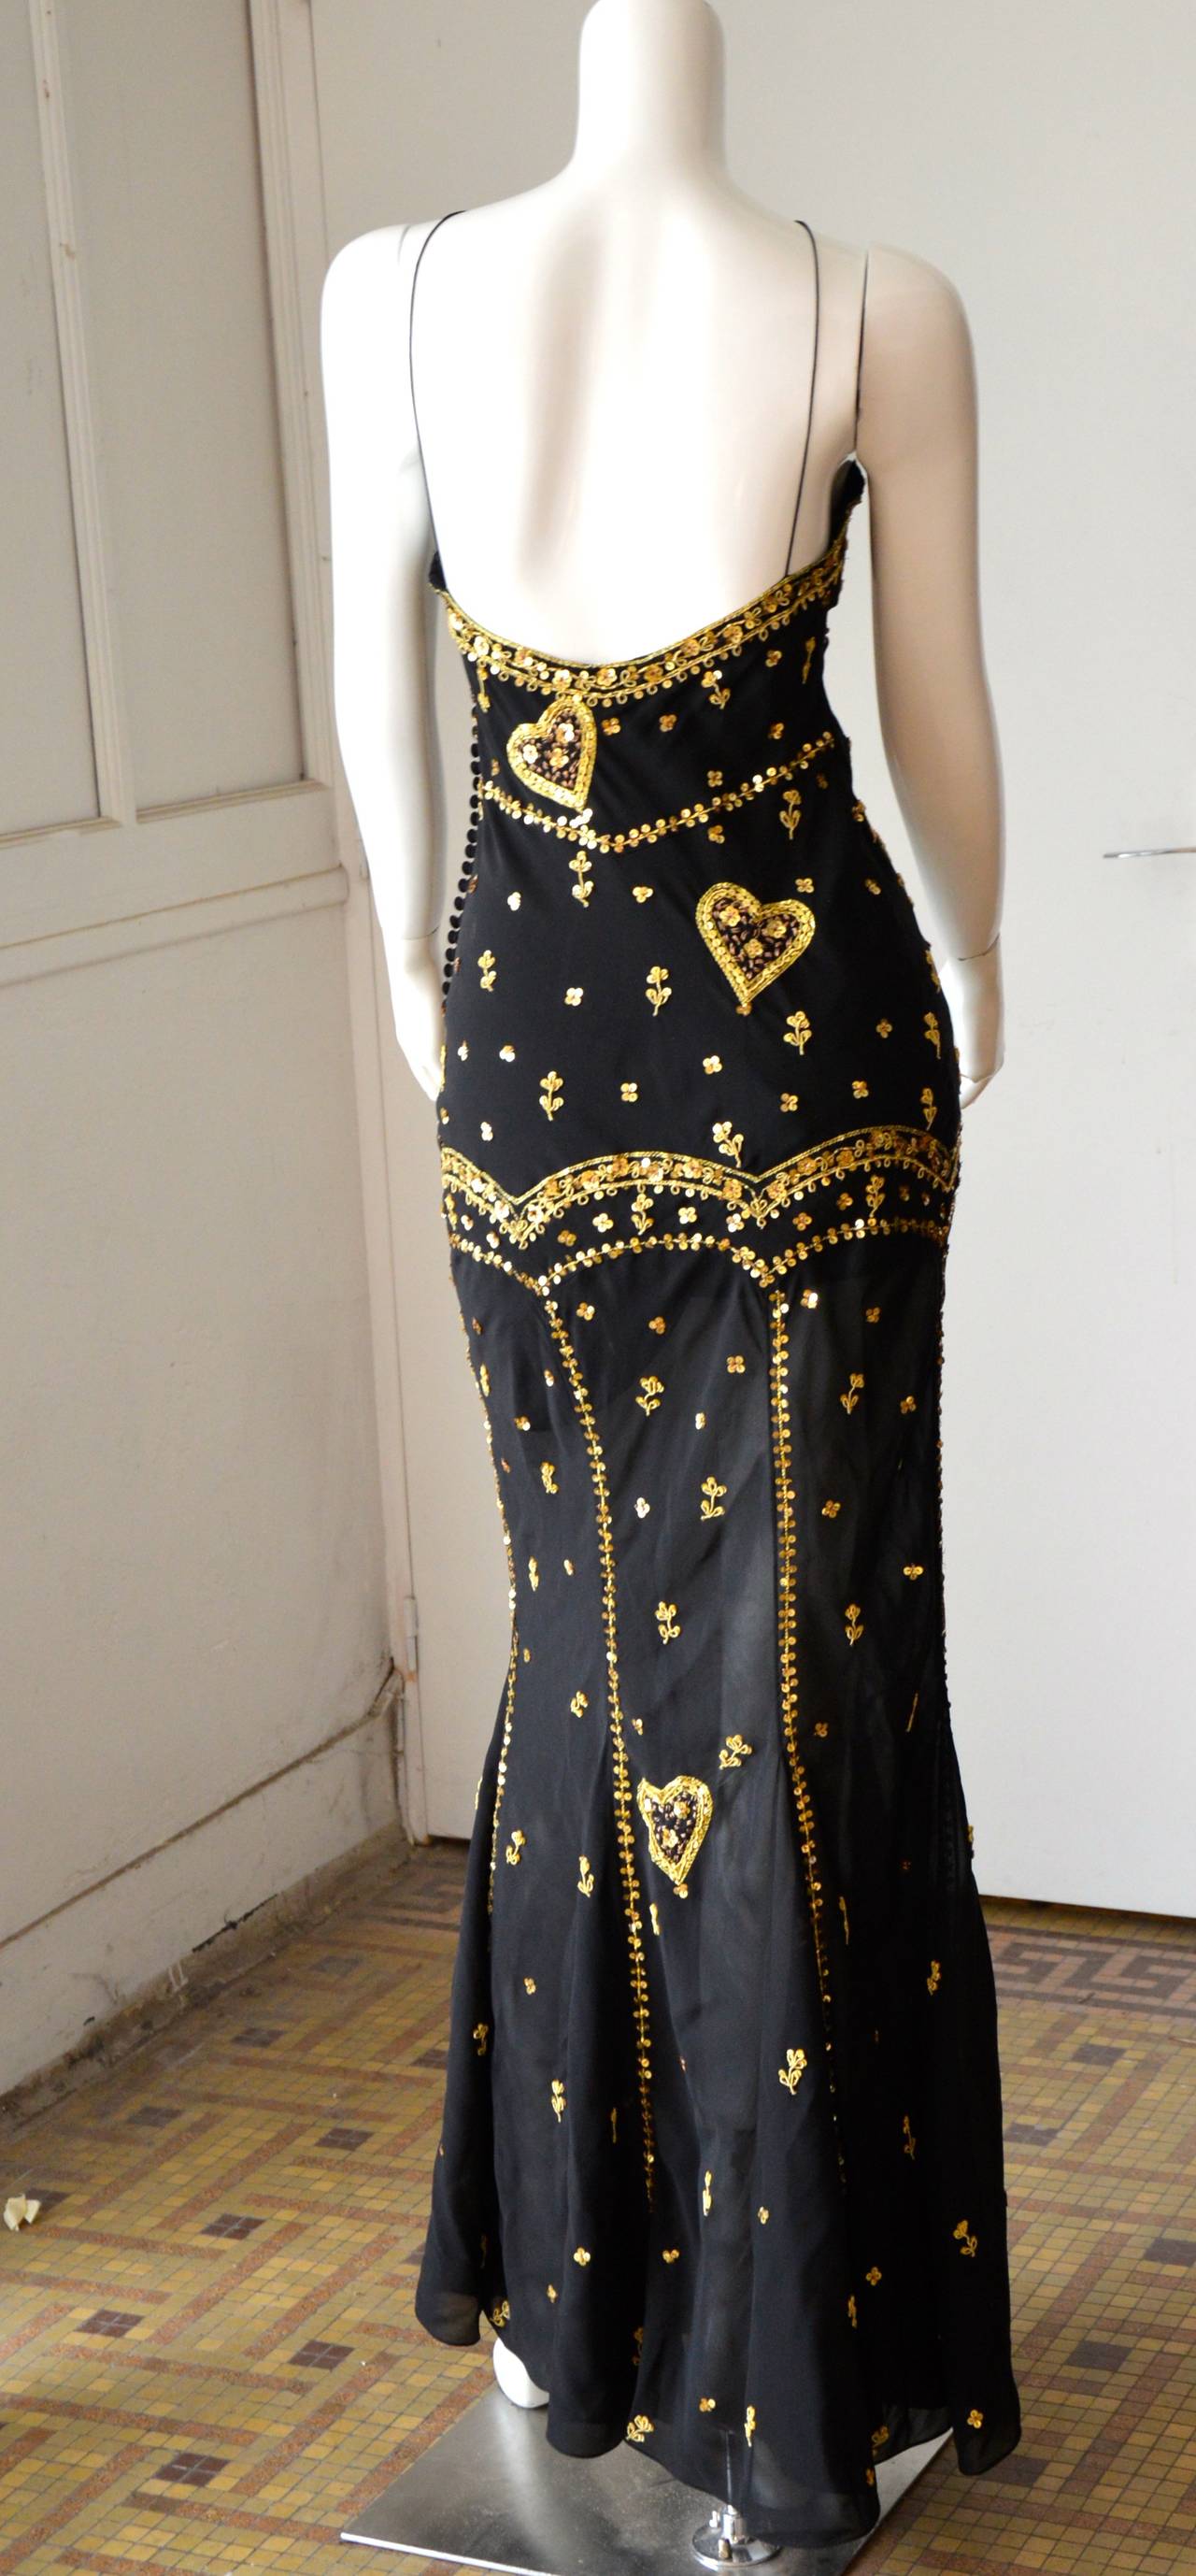 Women's John Galliano for Christian Dior Black Embroidered Gown For Sale